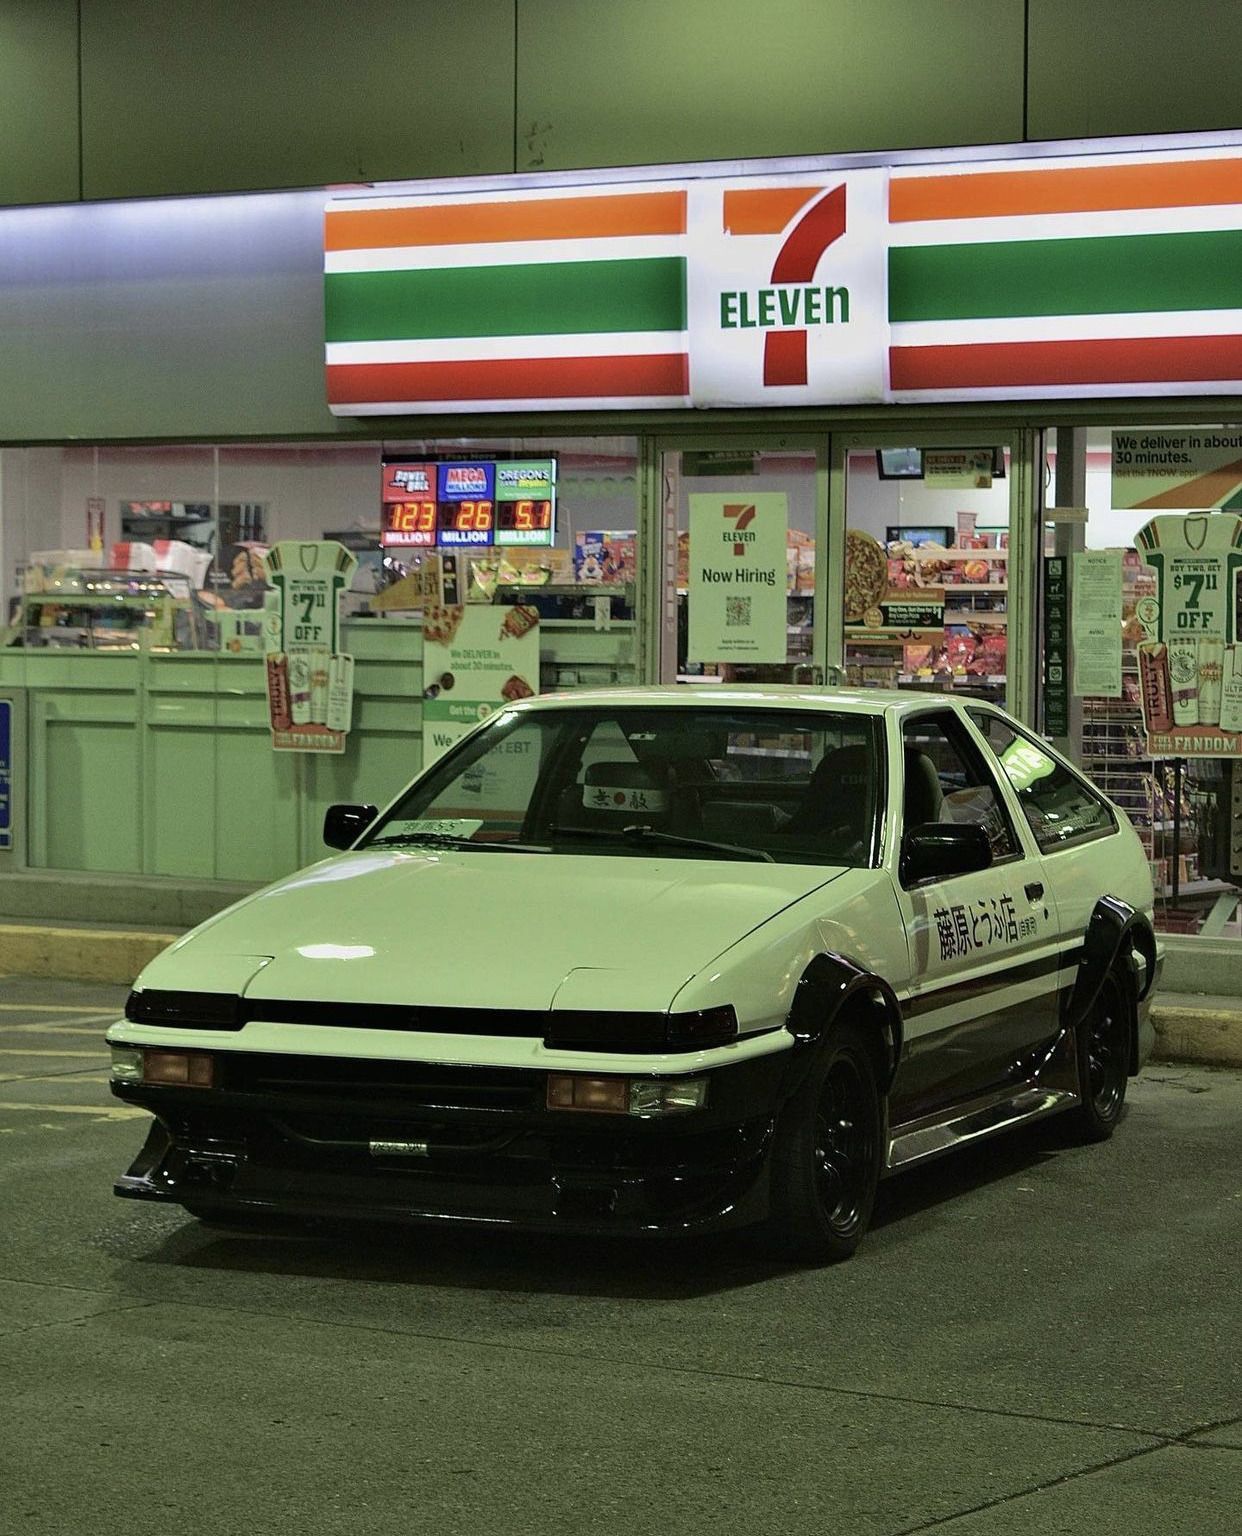 A white car parked in front of a 7-11 - Toyota AE86